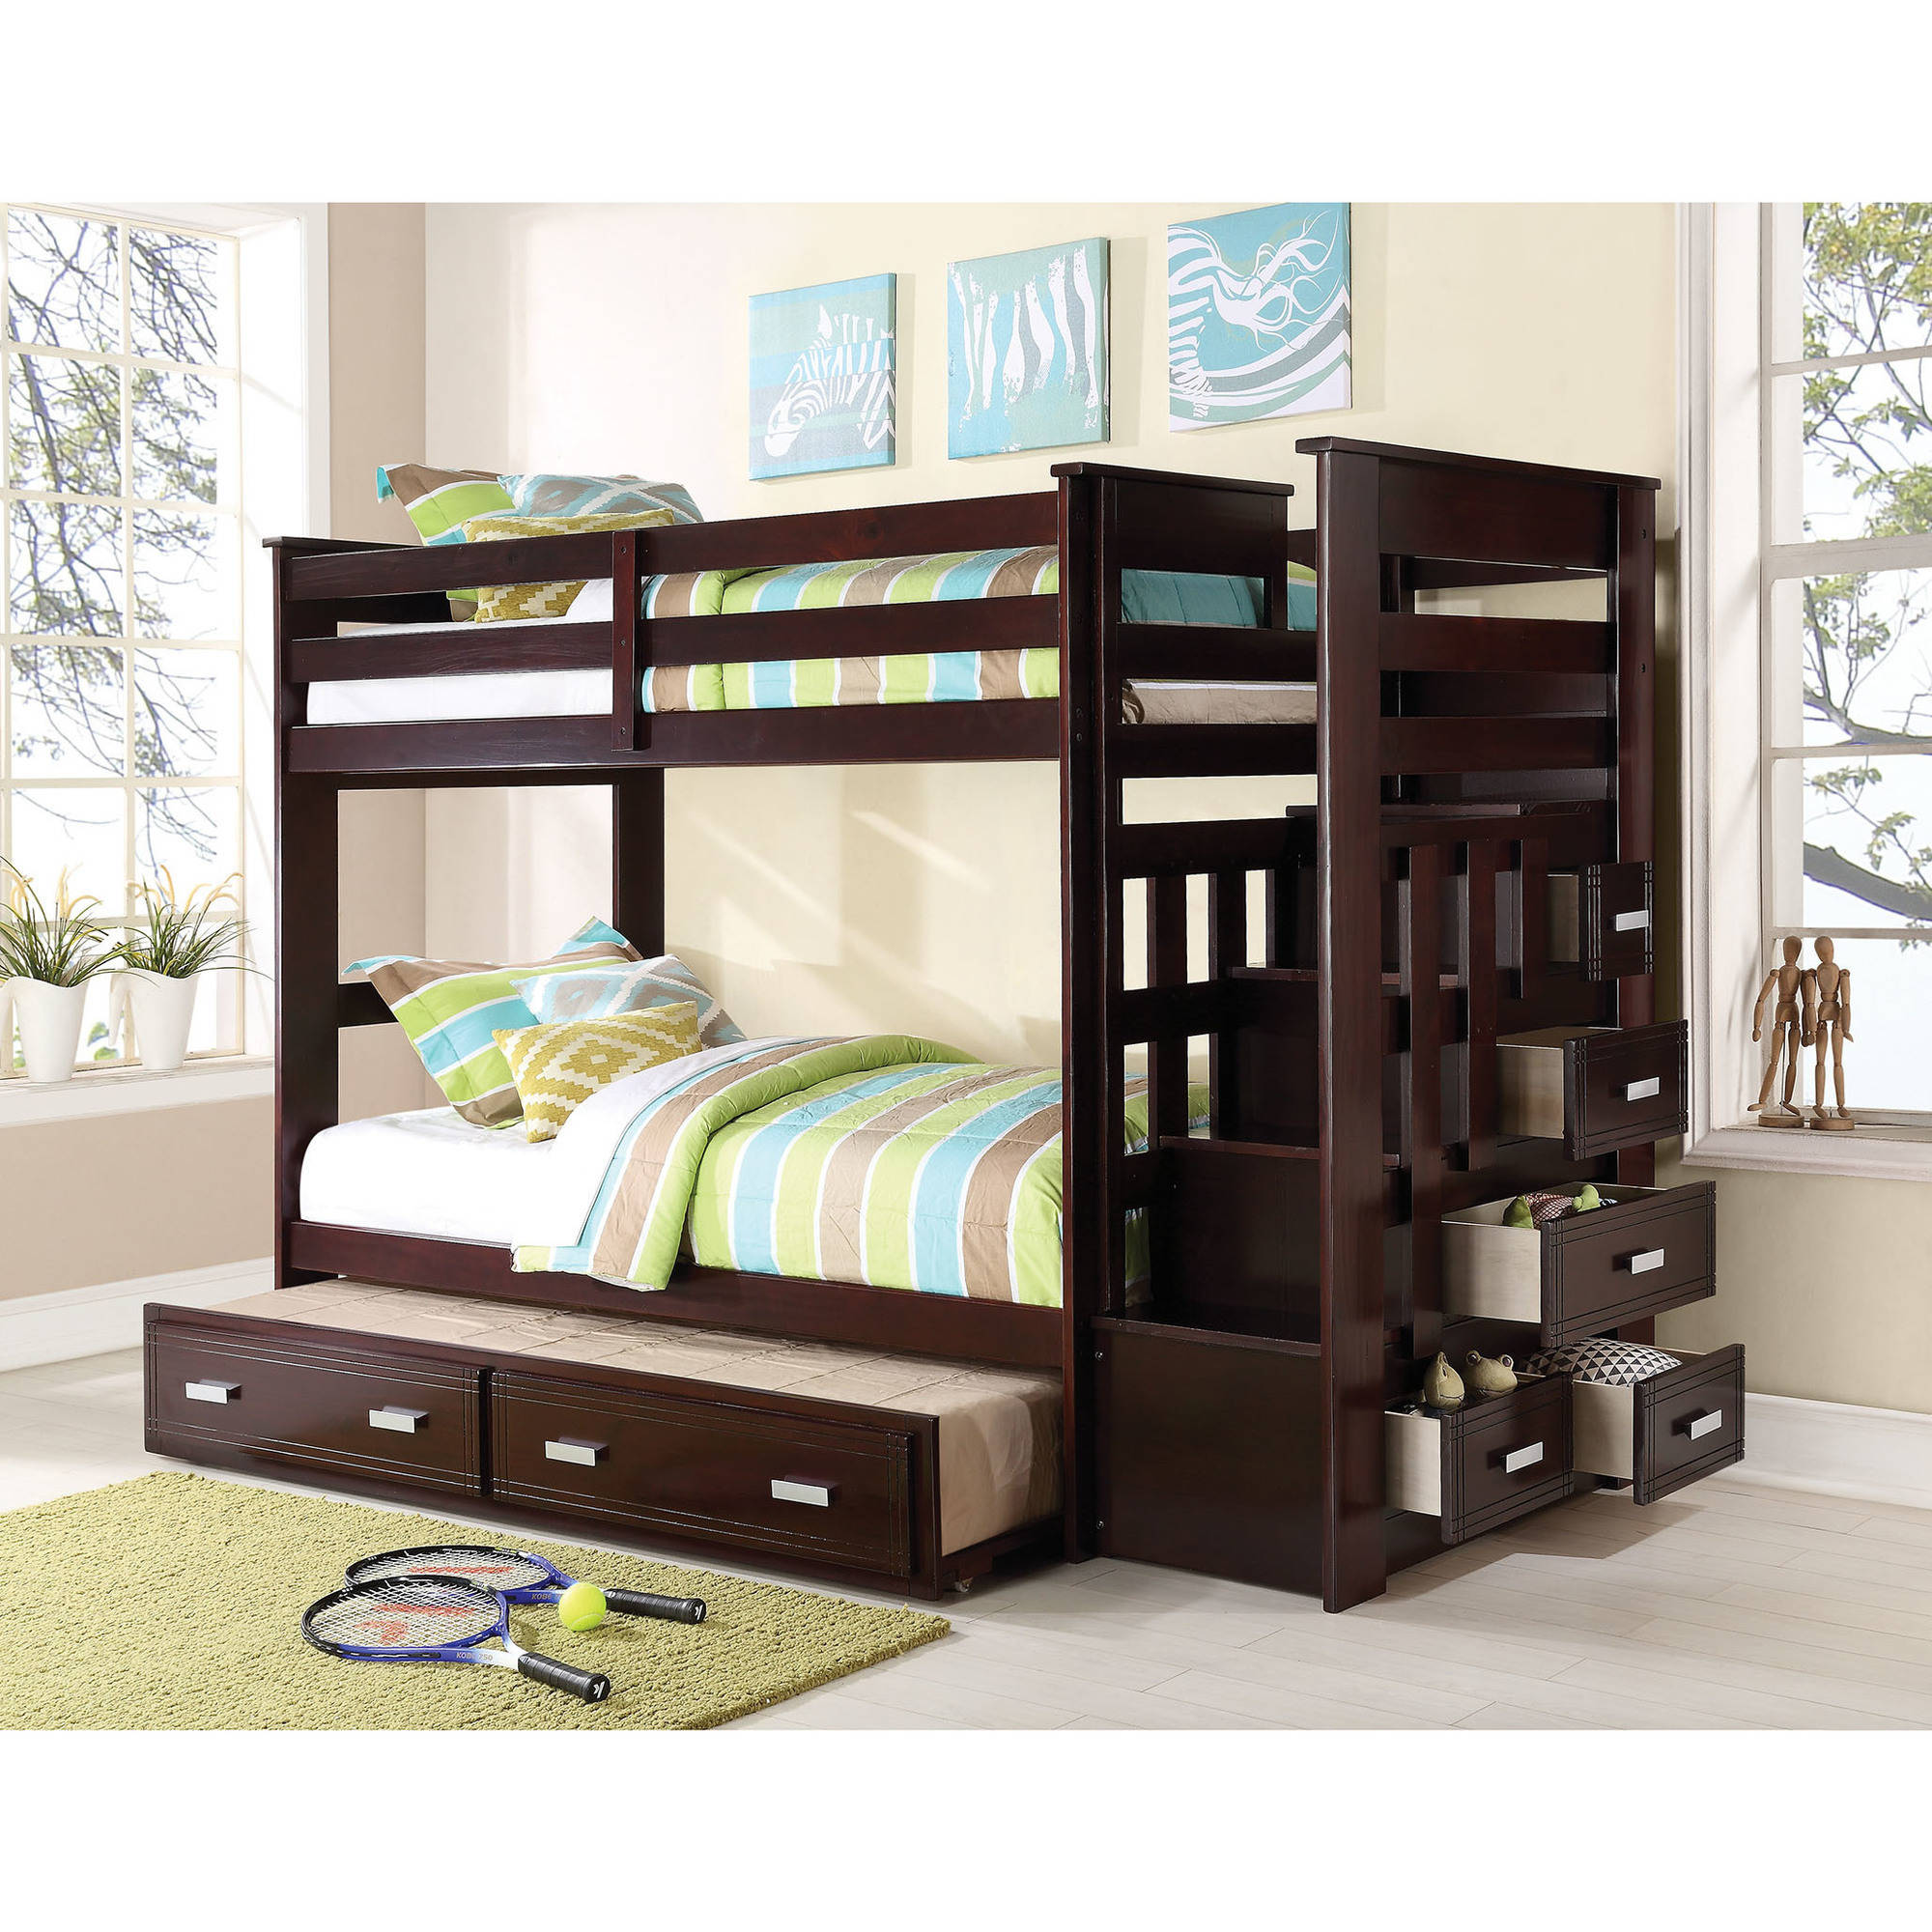 ACME Allentown Twin Over Twin Wood Bunk Bed with Storage